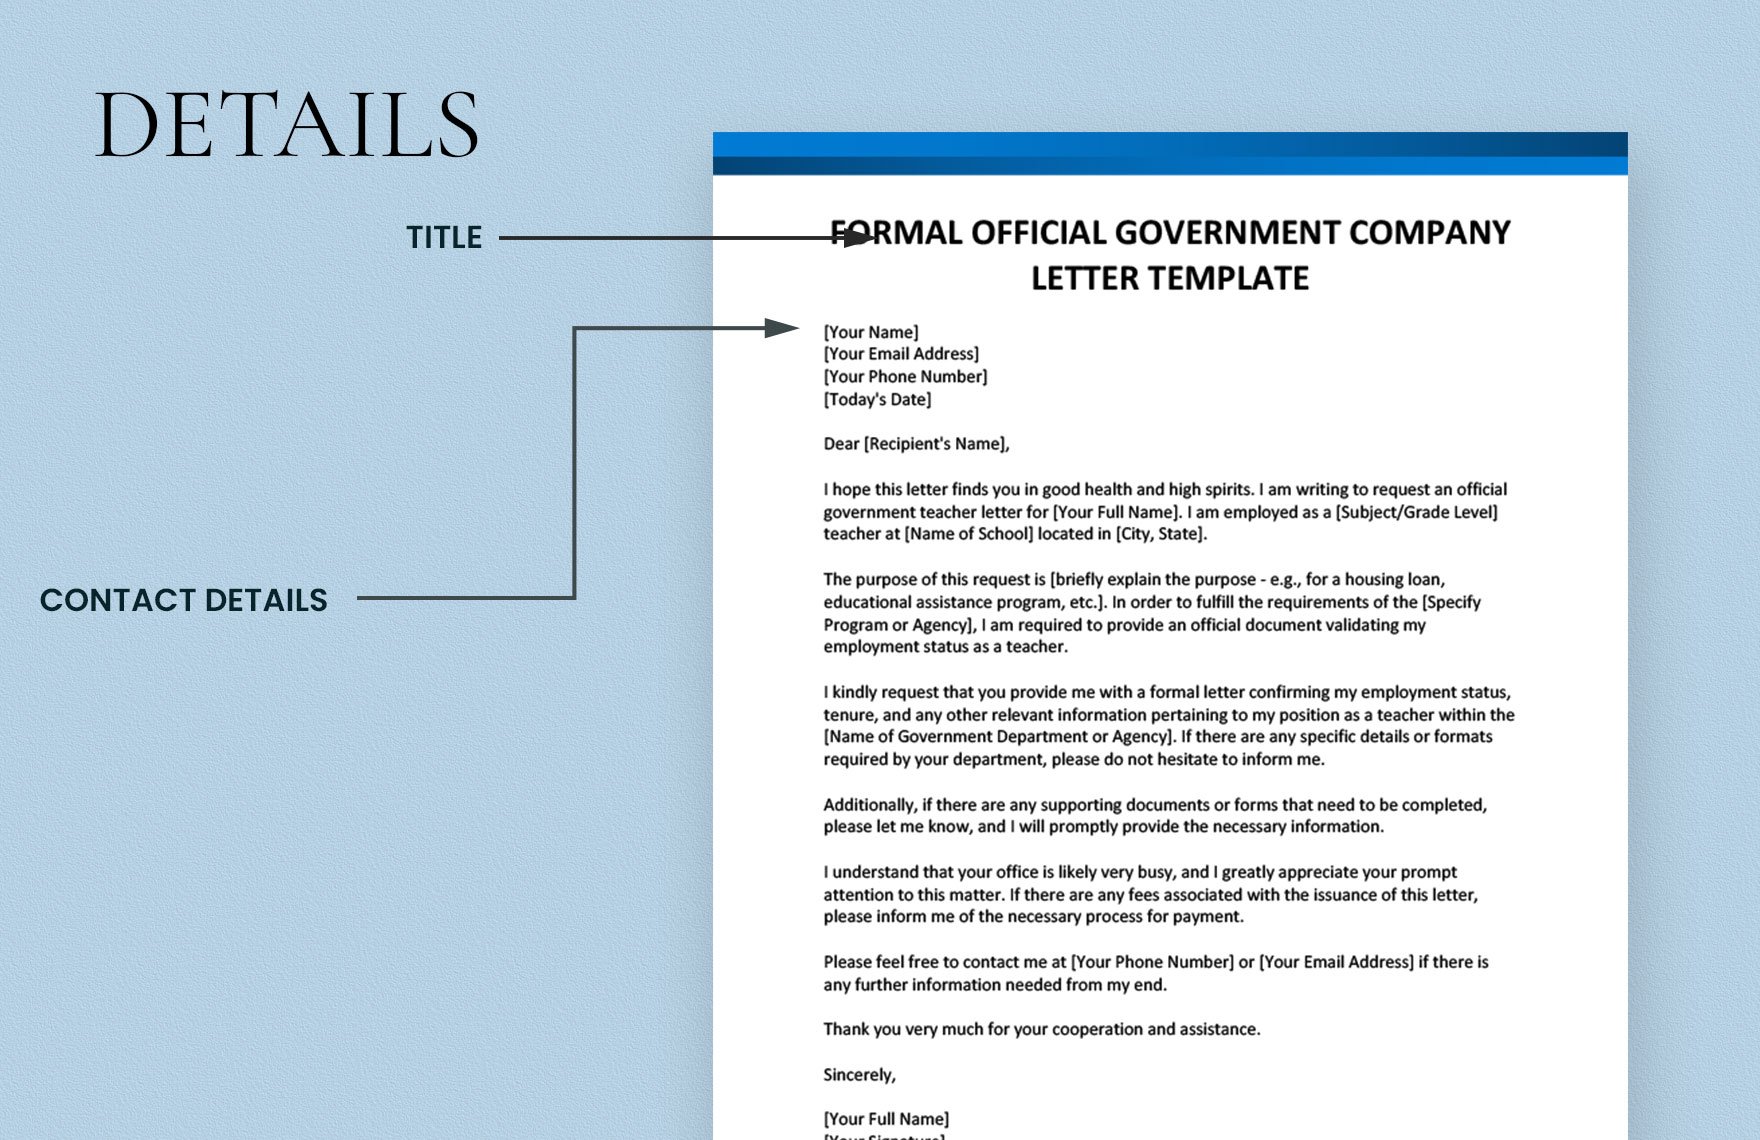 Formal Official Government Company Letter Template